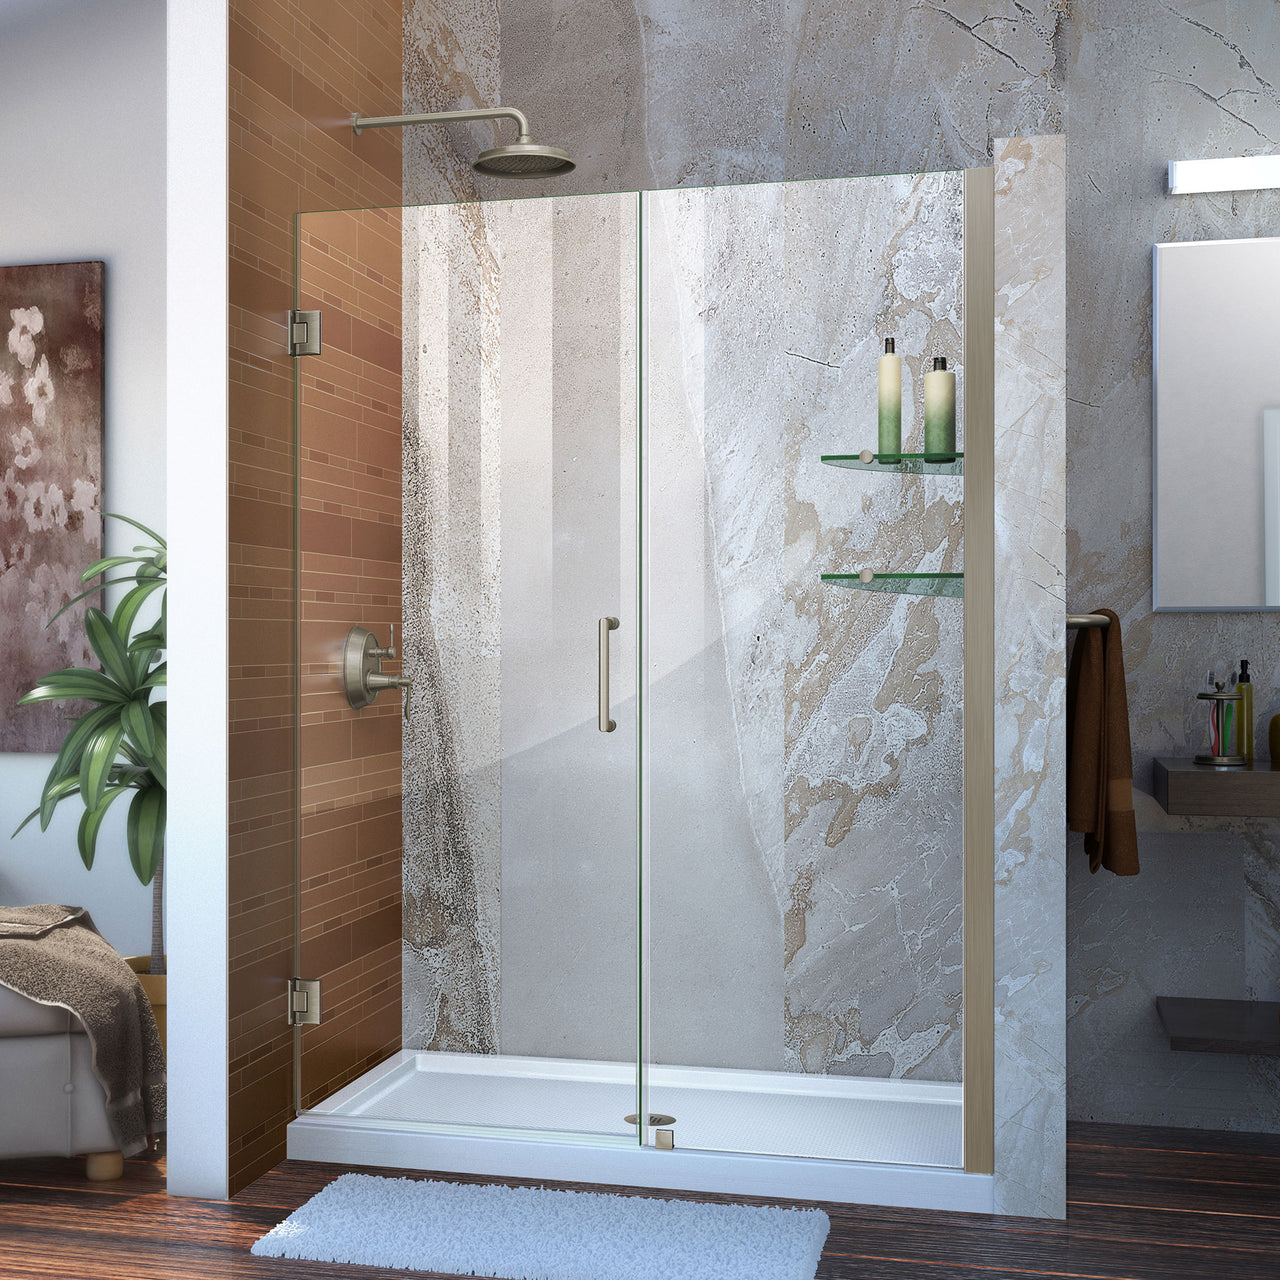 DreamLine Unidoor 51-52 in. W x 72 in. H Frameless Hinged Shower Door with Shelves, Clear Glass - BNGBath